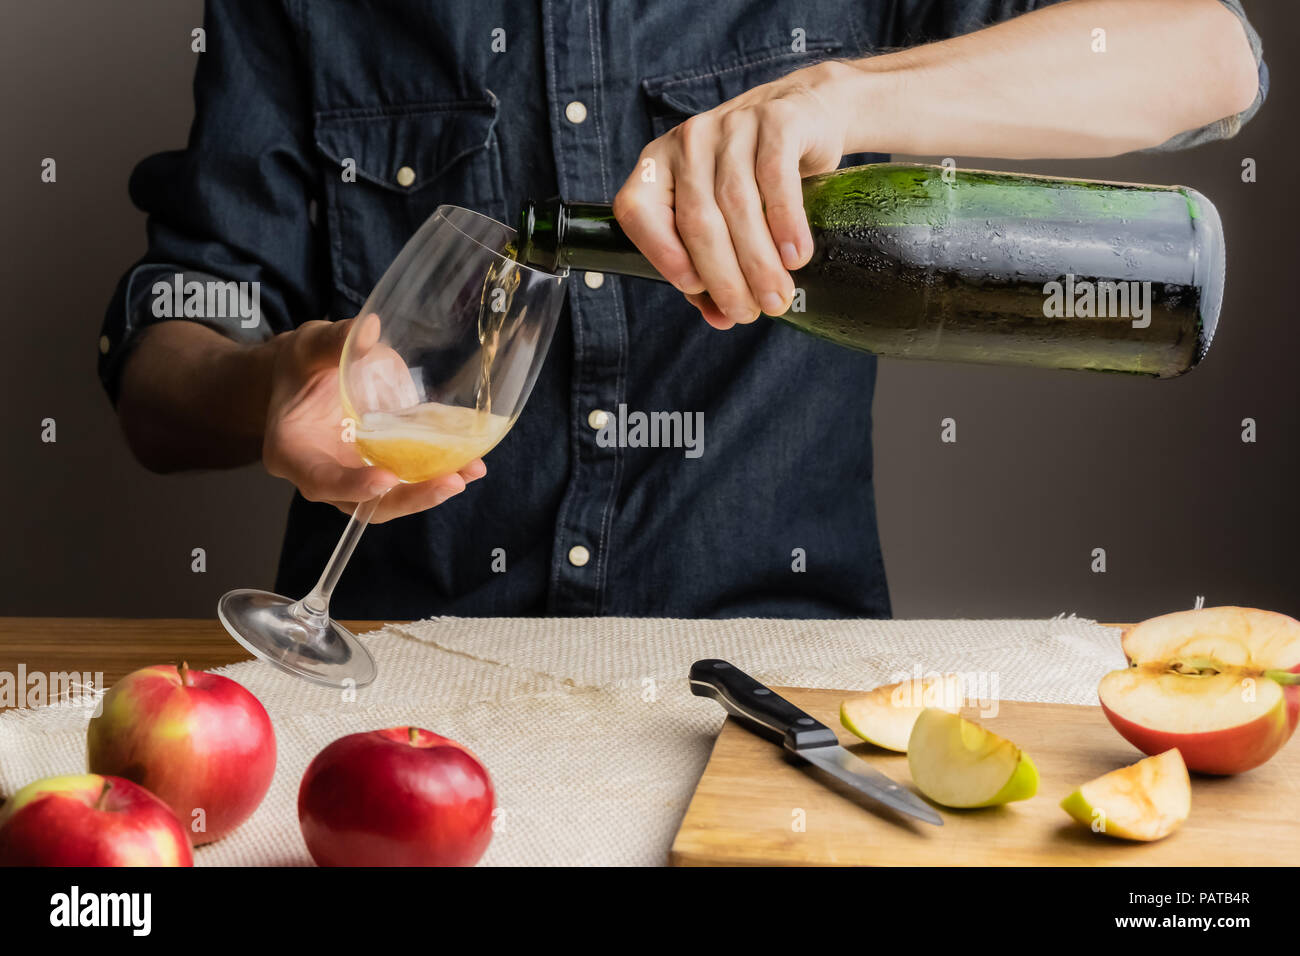 Man pours a glass of vintage apple wine out of ice cold bottle. Male hands pouring premium cidre in wine glass above rustic wood table. Stock Photo